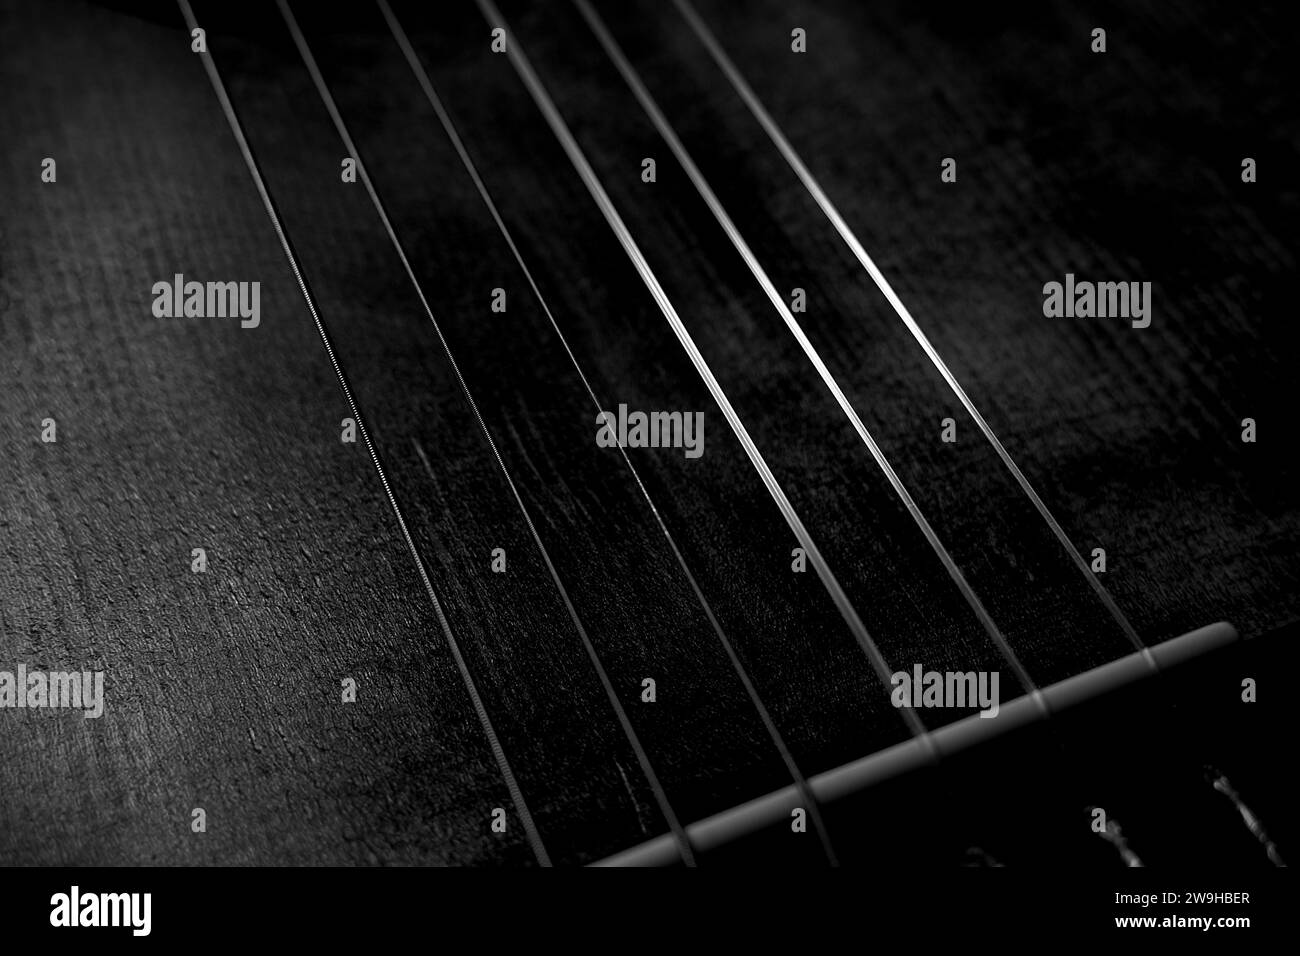 Close Up of Old Classical Guitar Strings and Bridge in Black and White Shadows Light Abstract Stock Photo